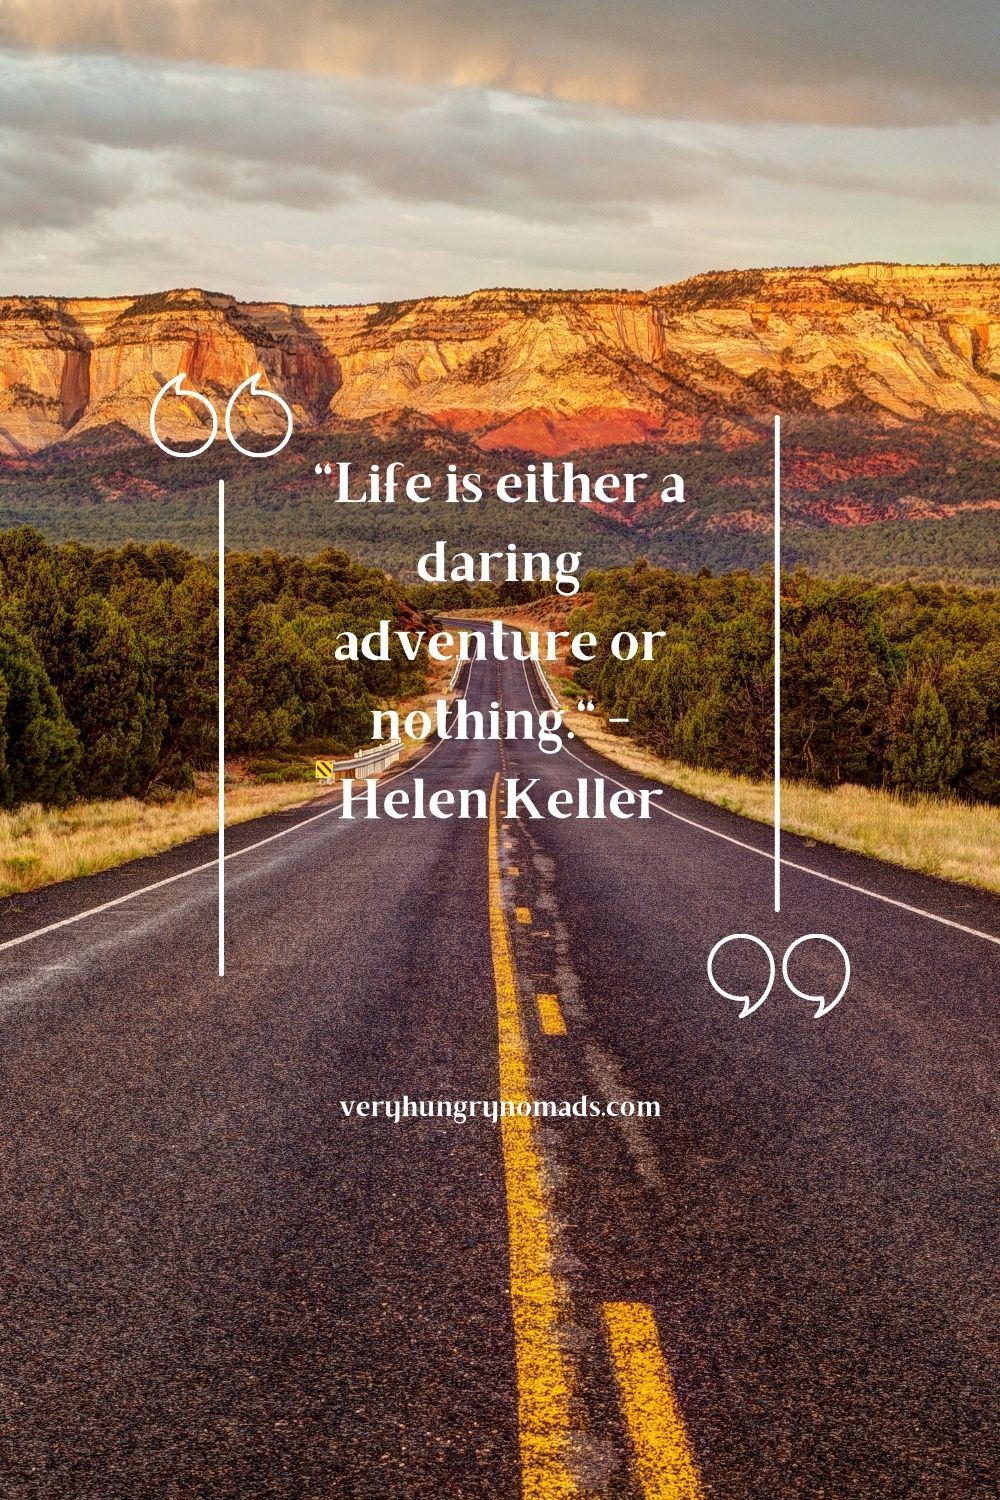 Life is either a daring adventure